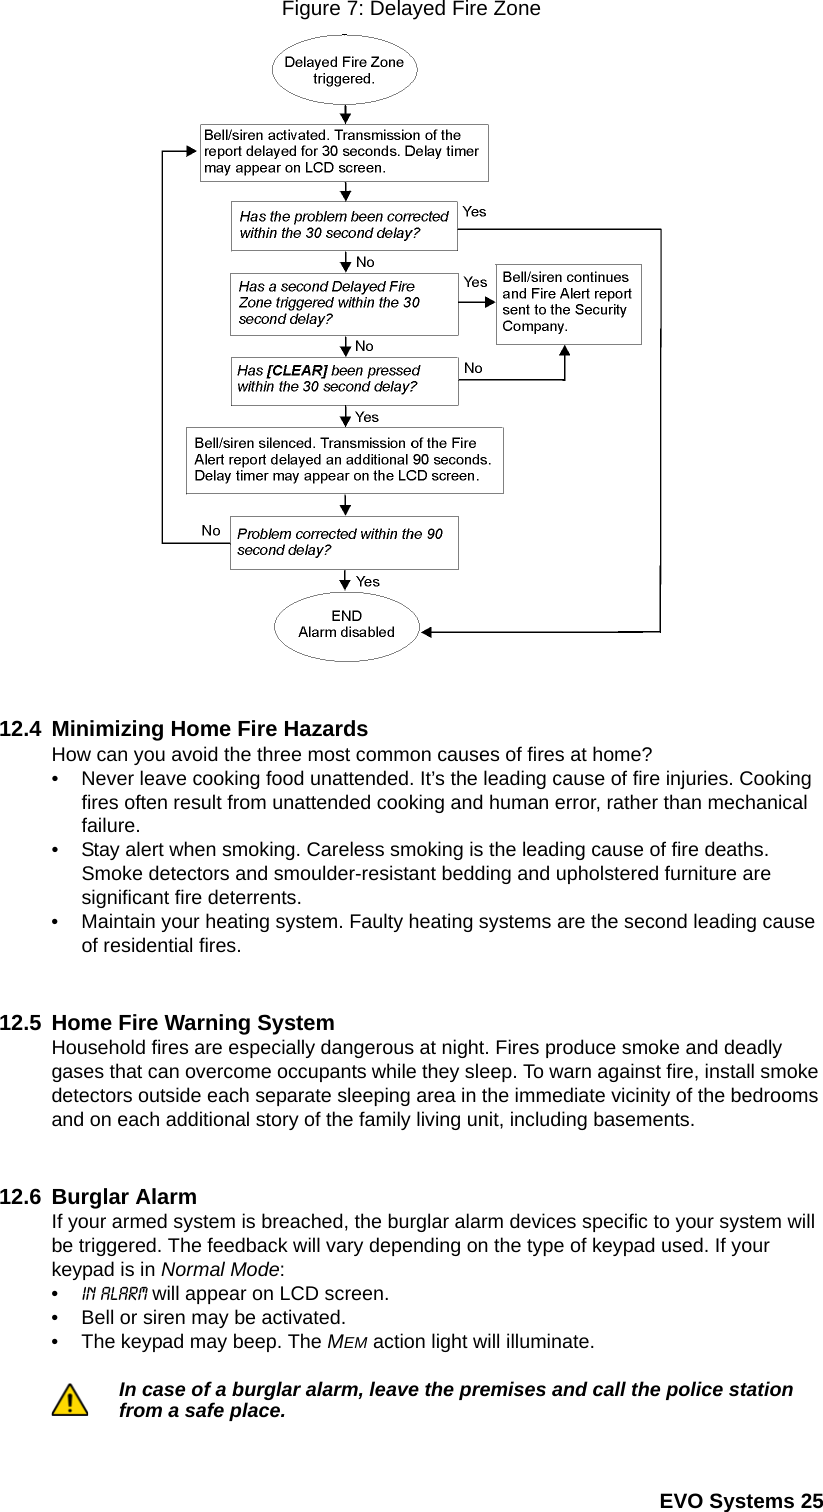  EVO Systems 25Figure 7: Delayed Fire Zone12.4  Minimizing Home Fire HazardsHow can you avoid the three most common causes of fires at home?• Never leave cooking food unattended. It’s the leading cause of fire injuries. Cooking fires often result from unattended cooking and human error, rather than mechanical failure. • Stay alert when smoking. Careless smoking is the leading cause of fire deaths. Smoke detectors and smoulder-resistant bedding and upholstered furniture are significant fire deterrents. • Maintain your heating system. Faulty heating systems are the second leading cause of residential fires. 12.5  Home Fire Warning System Household fires are especially dangerous at night. Fires produce smoke and deadly gases that can overcome occupants while they sleep. To warn against fire, install smoke detectors outside each separate sleeping area in the immediate vicinity of the bedrooms and on each additional story of the family living unit, including basements.12.6 Burglar AlarmIf your armed system is breached, the burglar alarm devices specific to your system will be triggered. The feedback will vary depending on the type of keypad used. If your keypad is in Normal Mode:•In Alarm will appear on LCD screen.• Bell or siren may be activated.• The keypad may beep. The MEM action light will illuminate. In case of a burglar alarm, leave the premises and call the police station from a safe place.